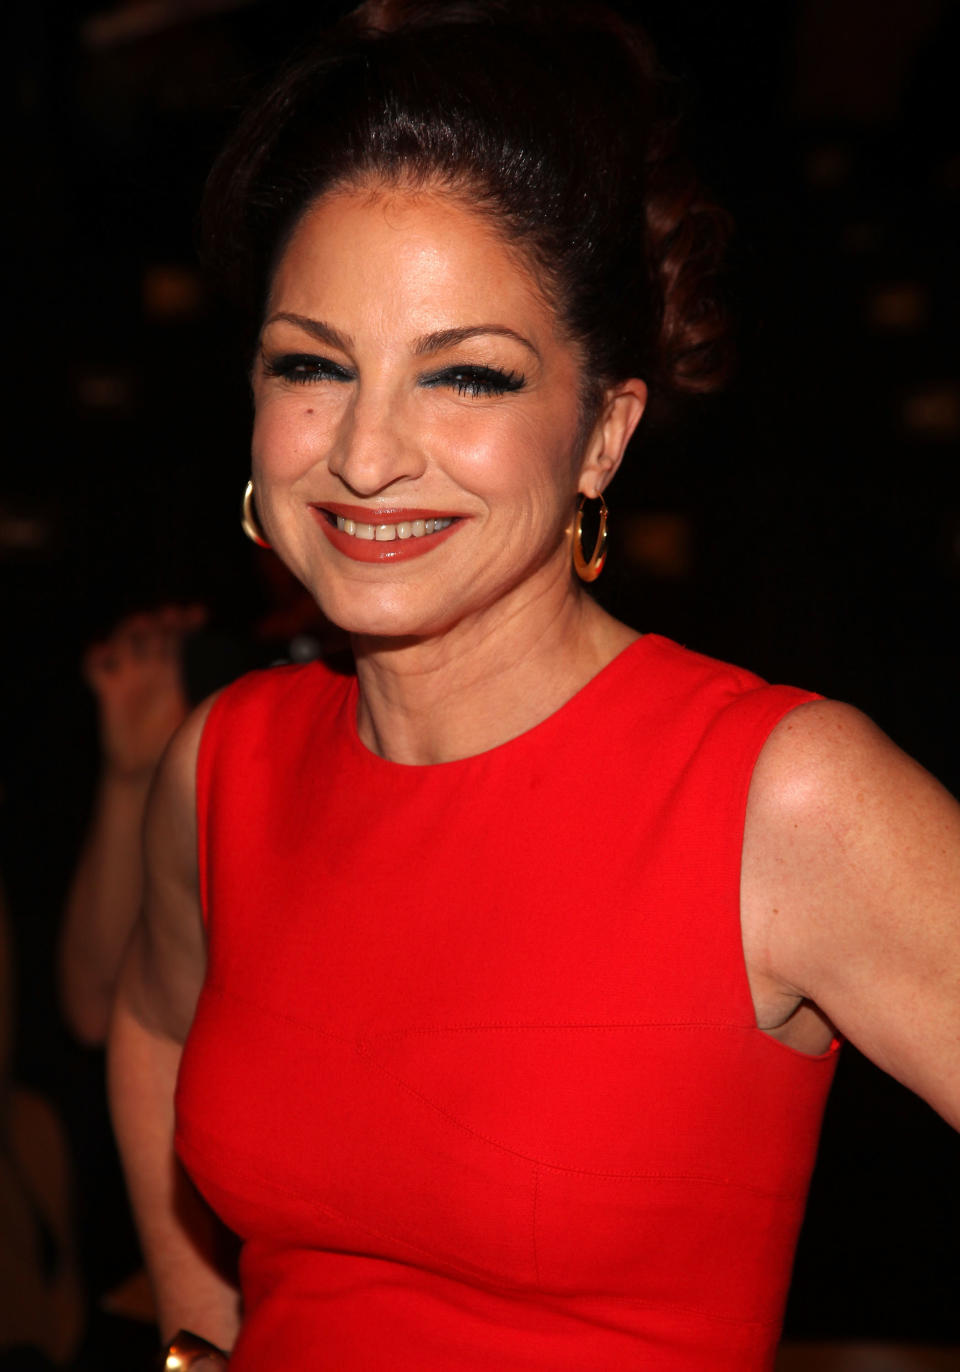 NEW YORK, NY - FEBRUARY 14: Singer Gloria Estefan attends the Narciso Rodriguez Fall 2012 fashion show during Mercedes-Benz Fashion Week at The Theatre at Lincoln Center on February 14, 2012 in New York City. (Photo by Astrid Stawiarz/Getty Images for Mercedes-Benz Fashion Week)